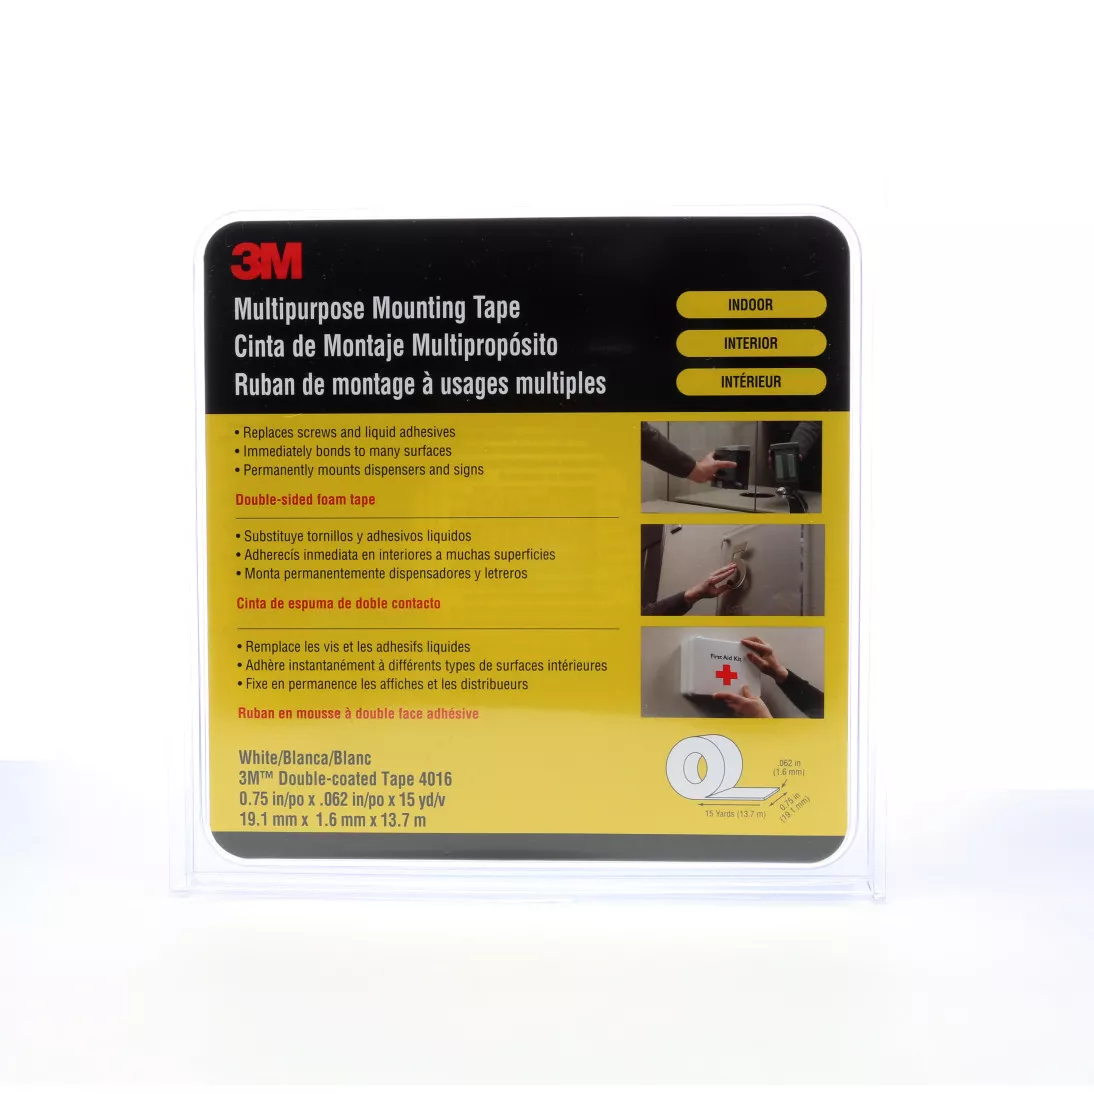 3M™ Multipurpose Mounting Tape 4016, Off White, 3/4 in x 15 yd, 62 mil,
12 rolls per case